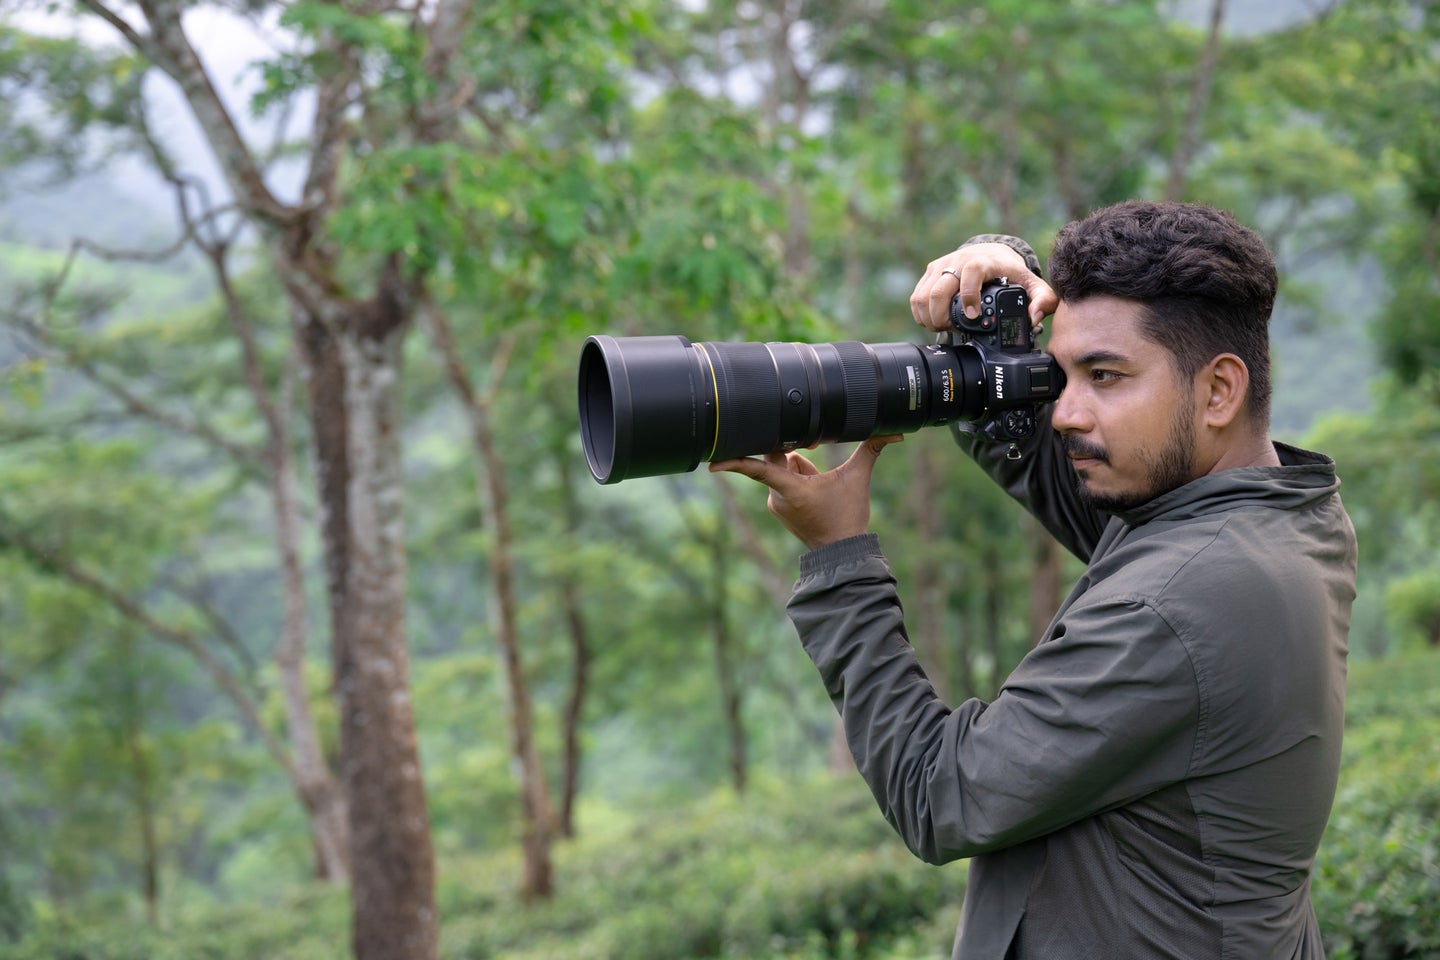 Nikon NIKKOR Z 600mm f/6.3 VR S Lens on a Nikon camera held by a man in a forest